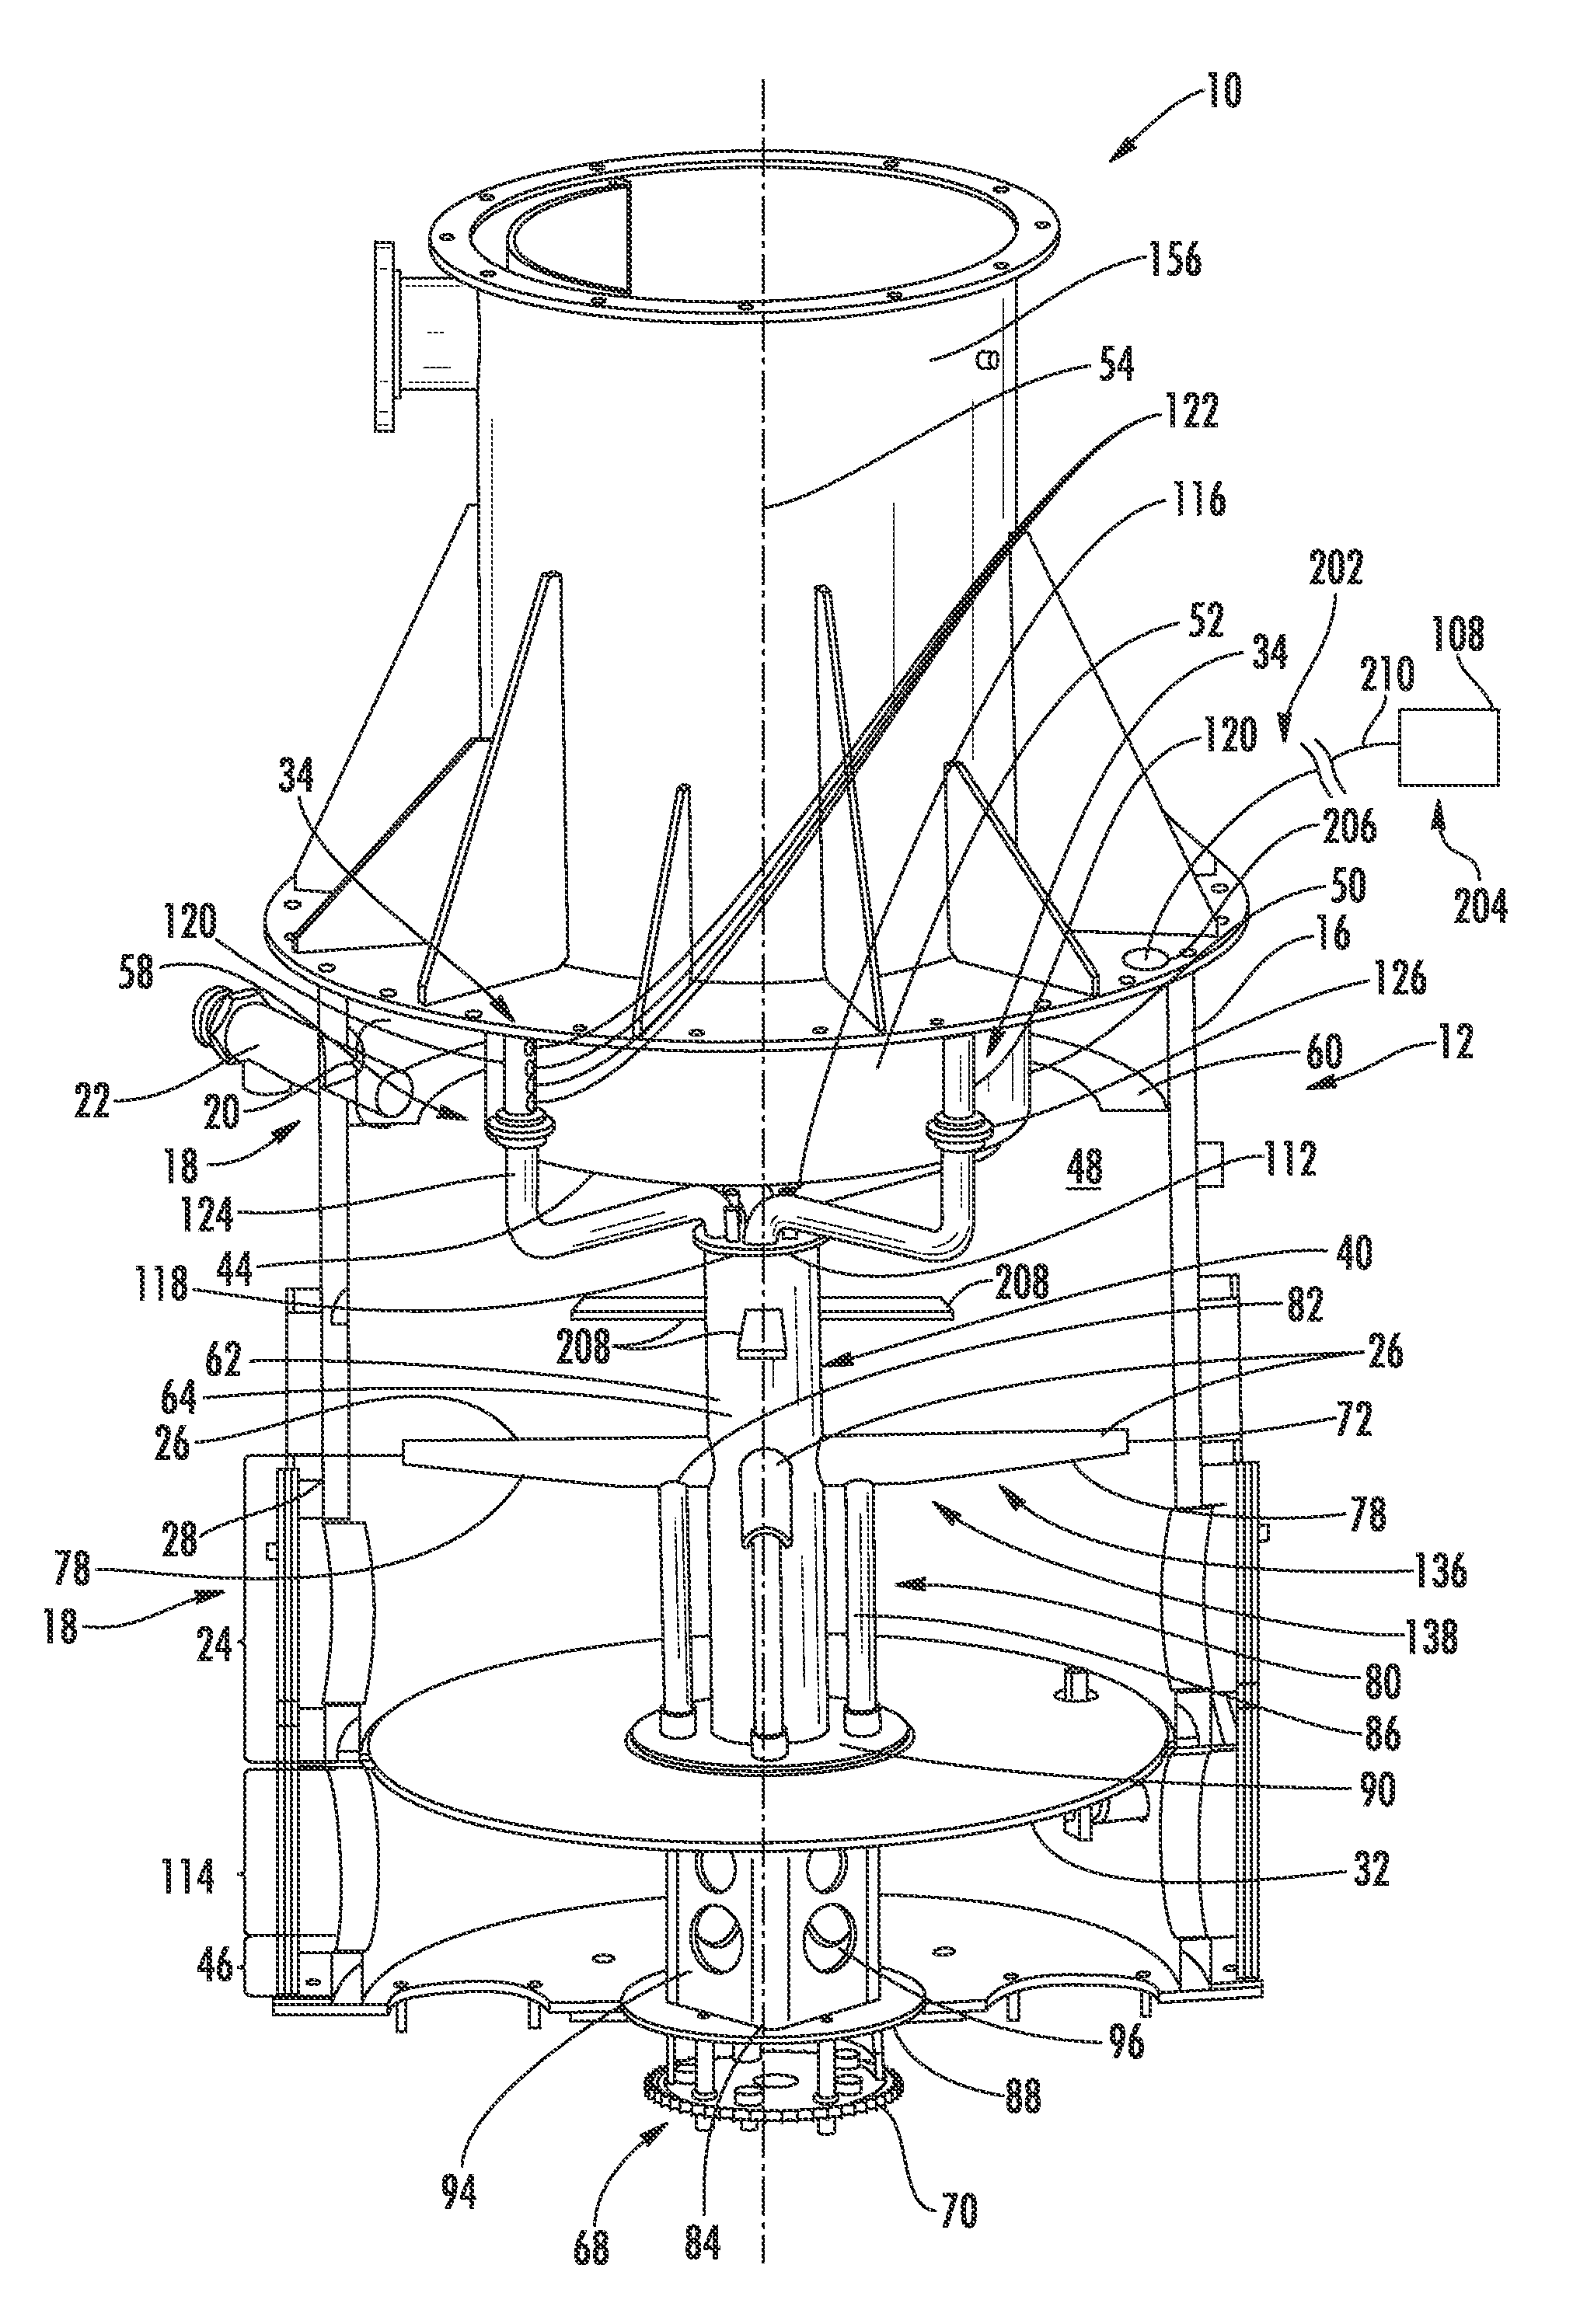 Plasma assisted gasification system with an indirect vacuum system